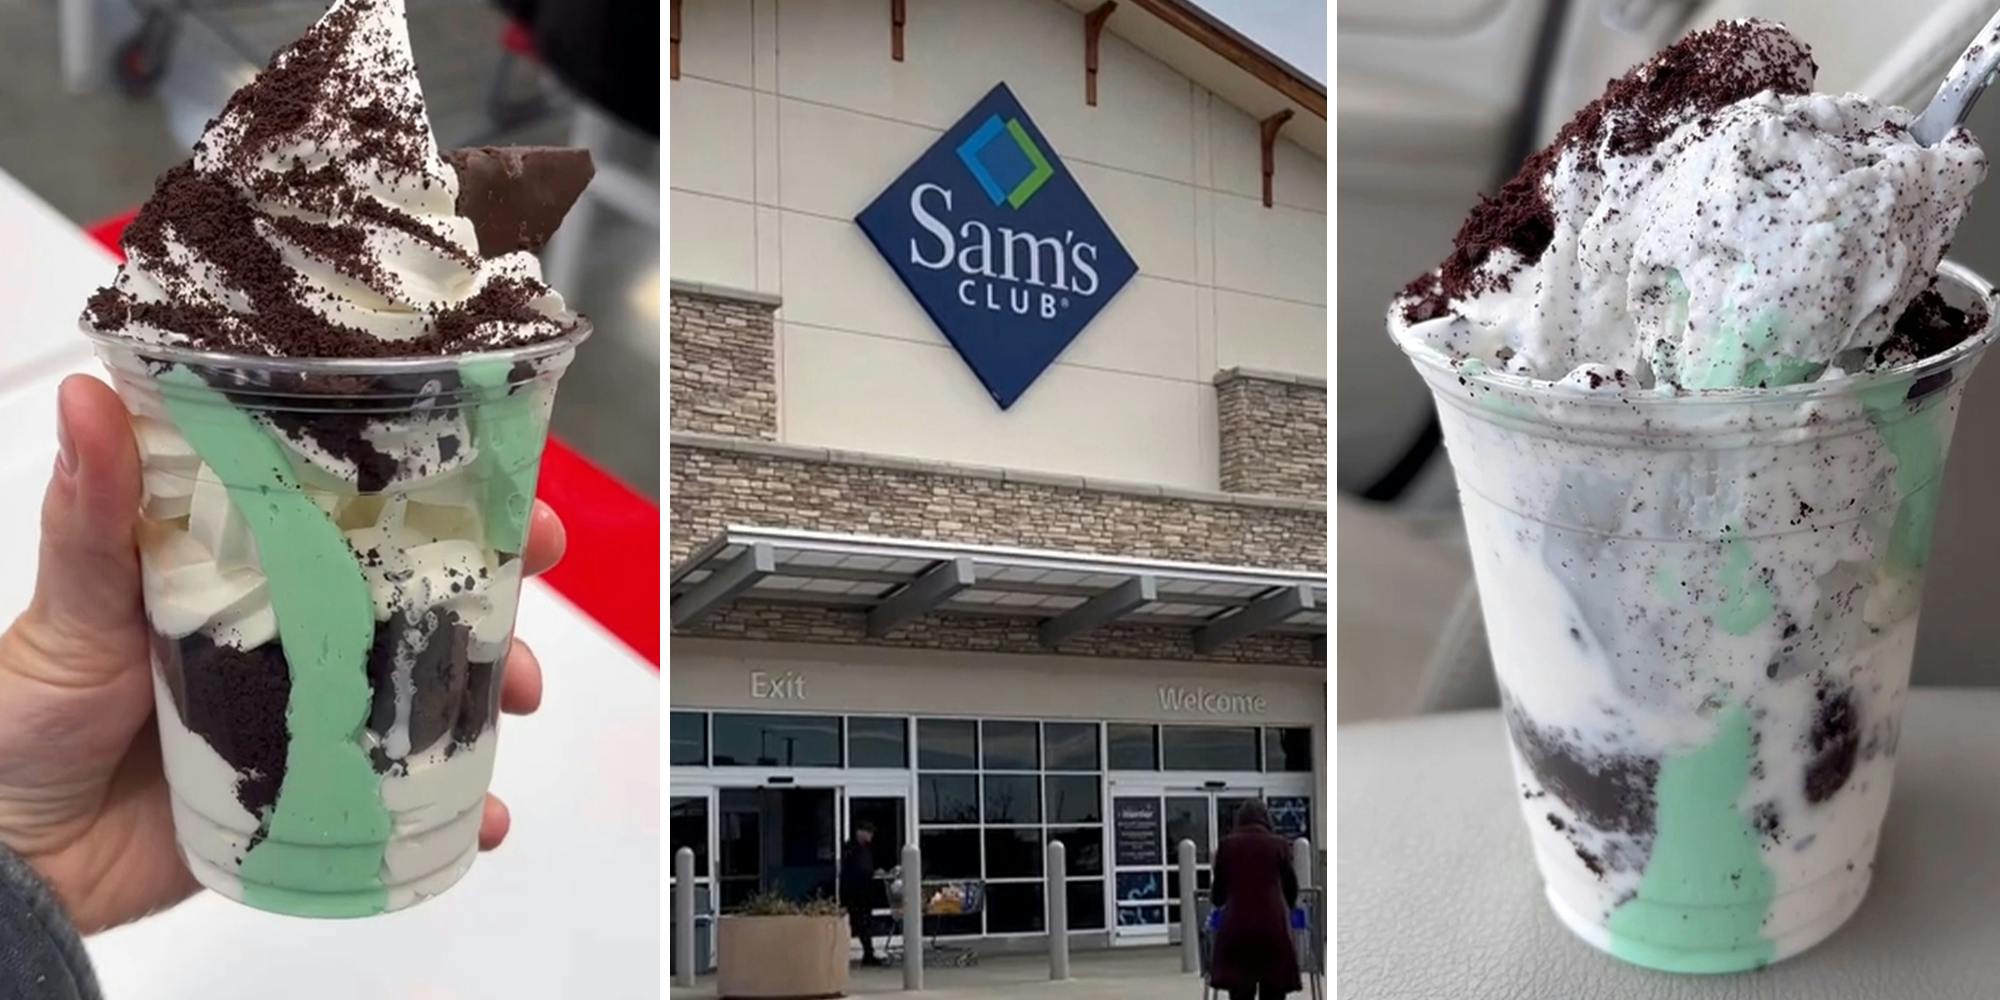 Sam’s Club new mint brownie sundae is all the rage this winter